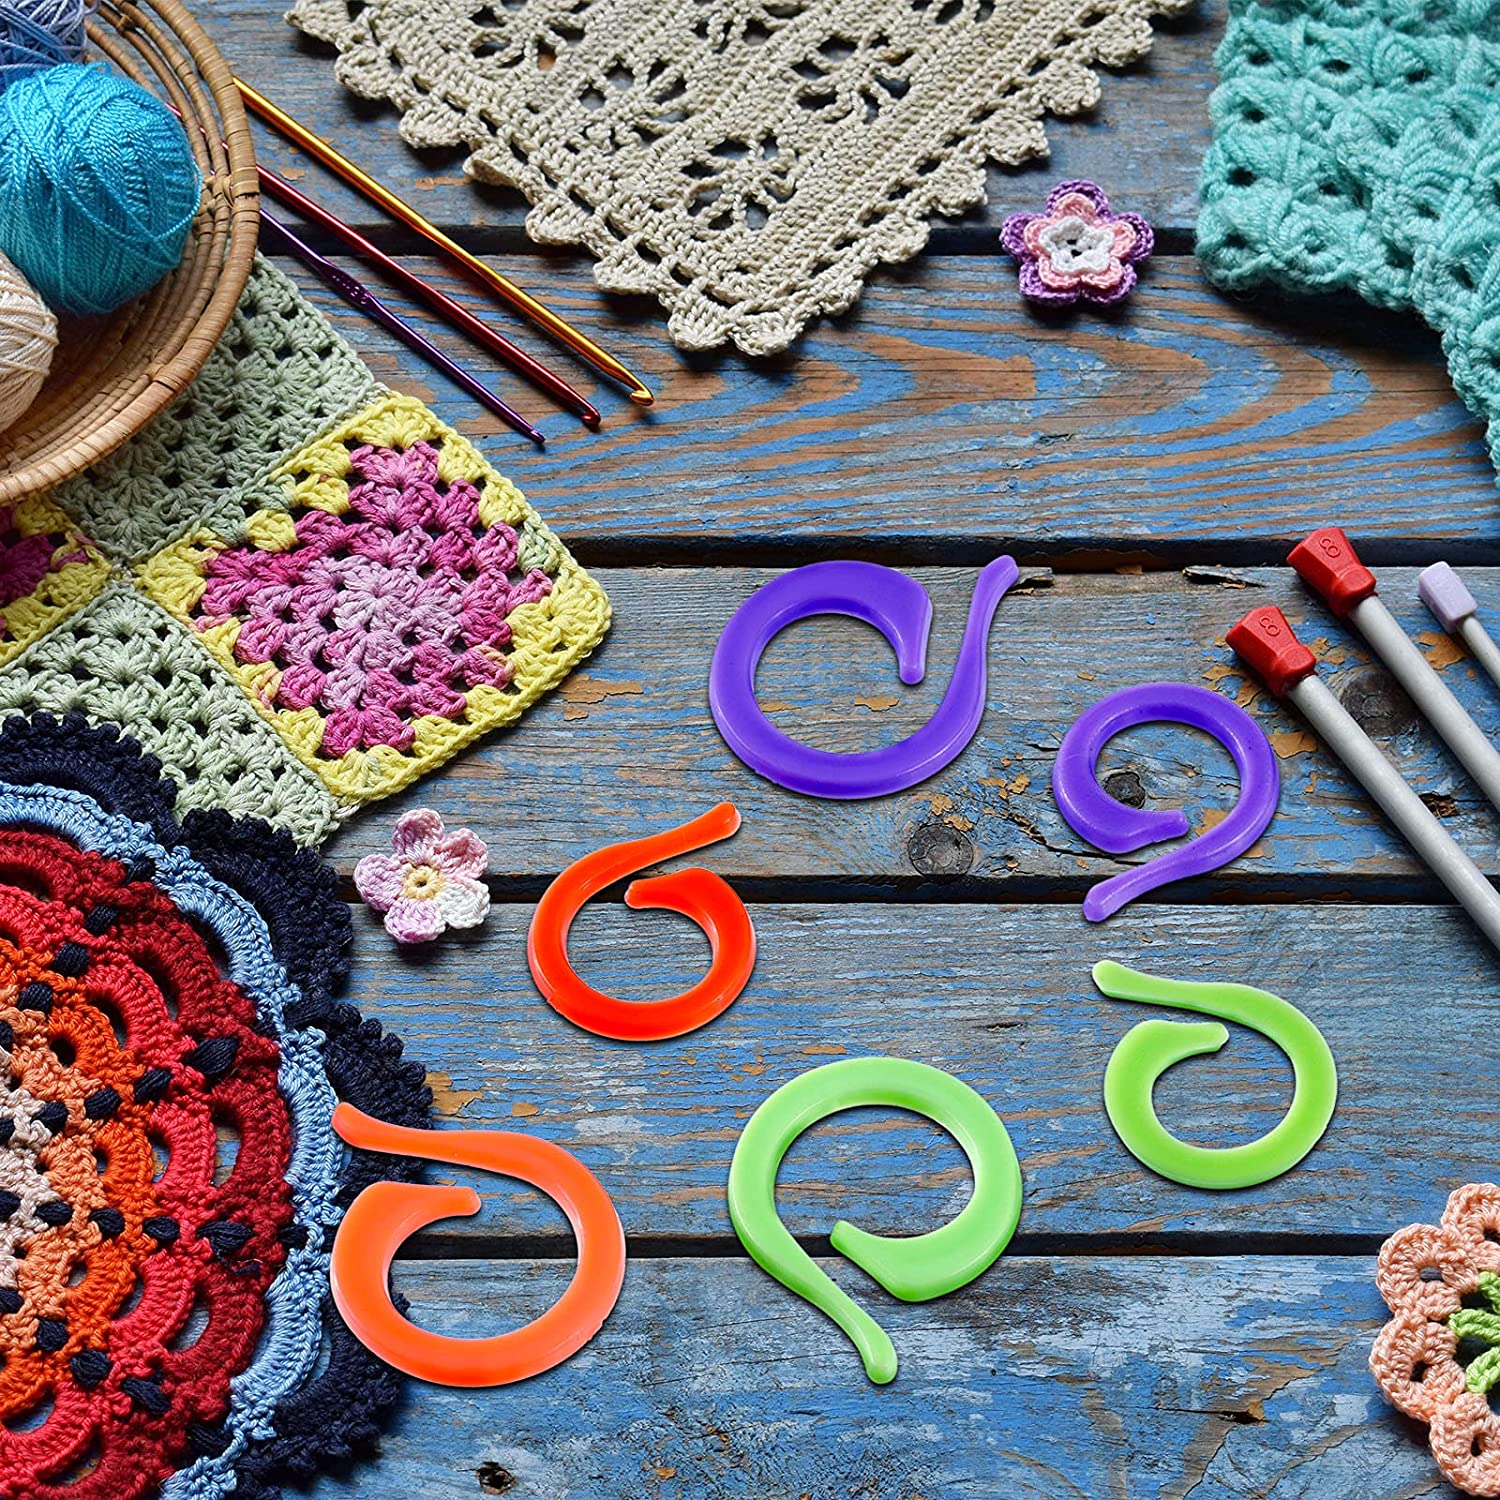 200 Pieces Knitting Stitch Markers Crochet Stitch Markers Colorful Knitting Crochet  Markers Stitch Marker Ring Crochet Locking Sewing Accessories Plastic Knit  Split Ring for DIY Handmade Crafts 